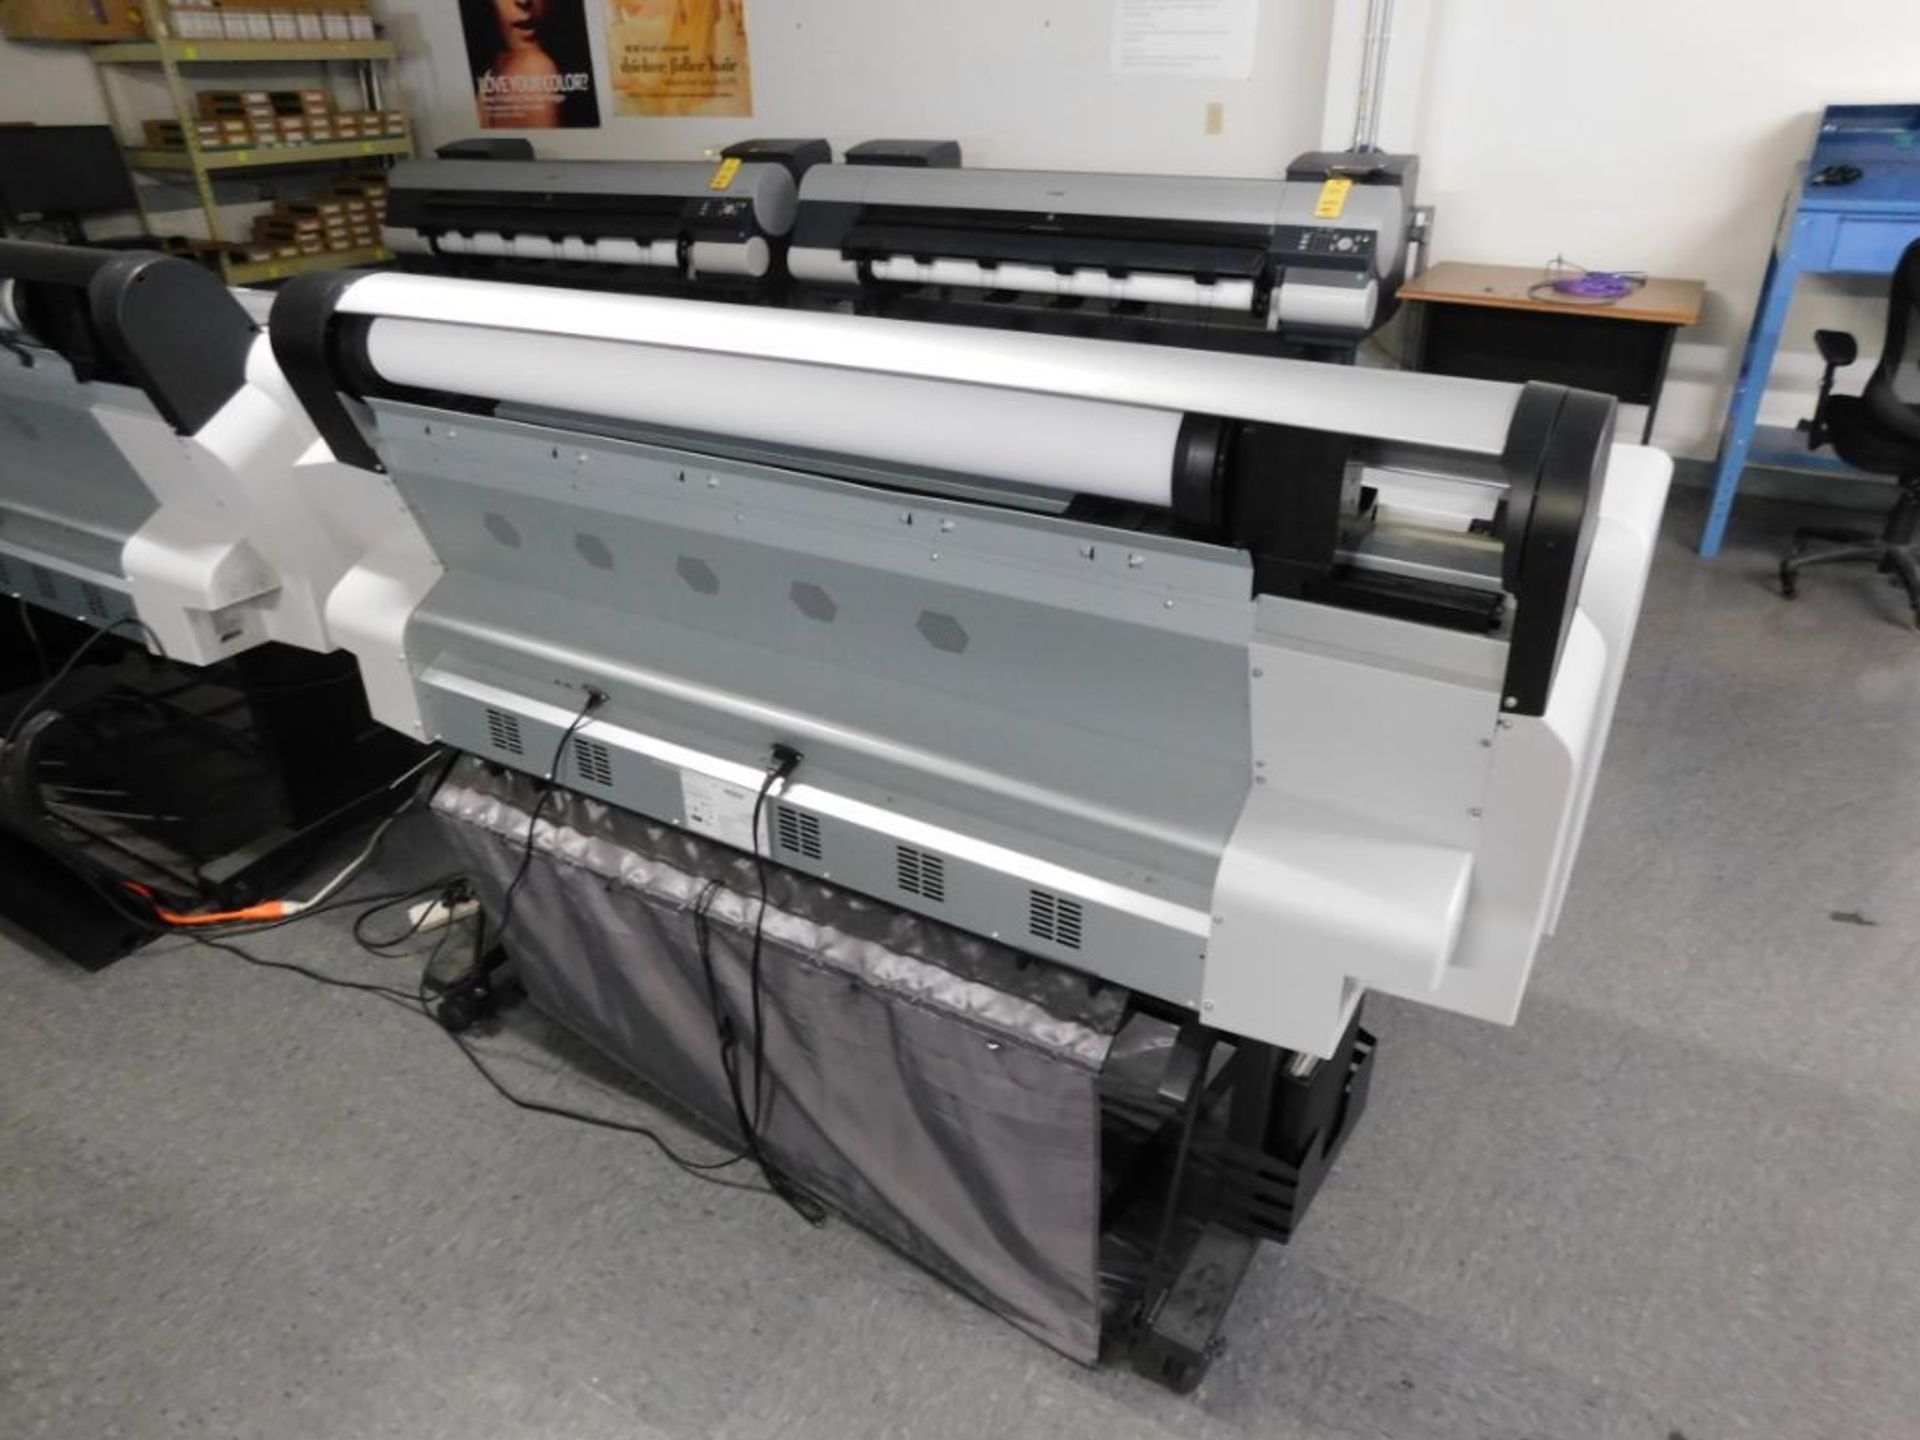 Epson Stylus Pro 9700 Large Format Printer Model K126A, S/N LNDE006620 (LOCATED IN MINNEAPOLIS, MN.) - Image 4 of 5